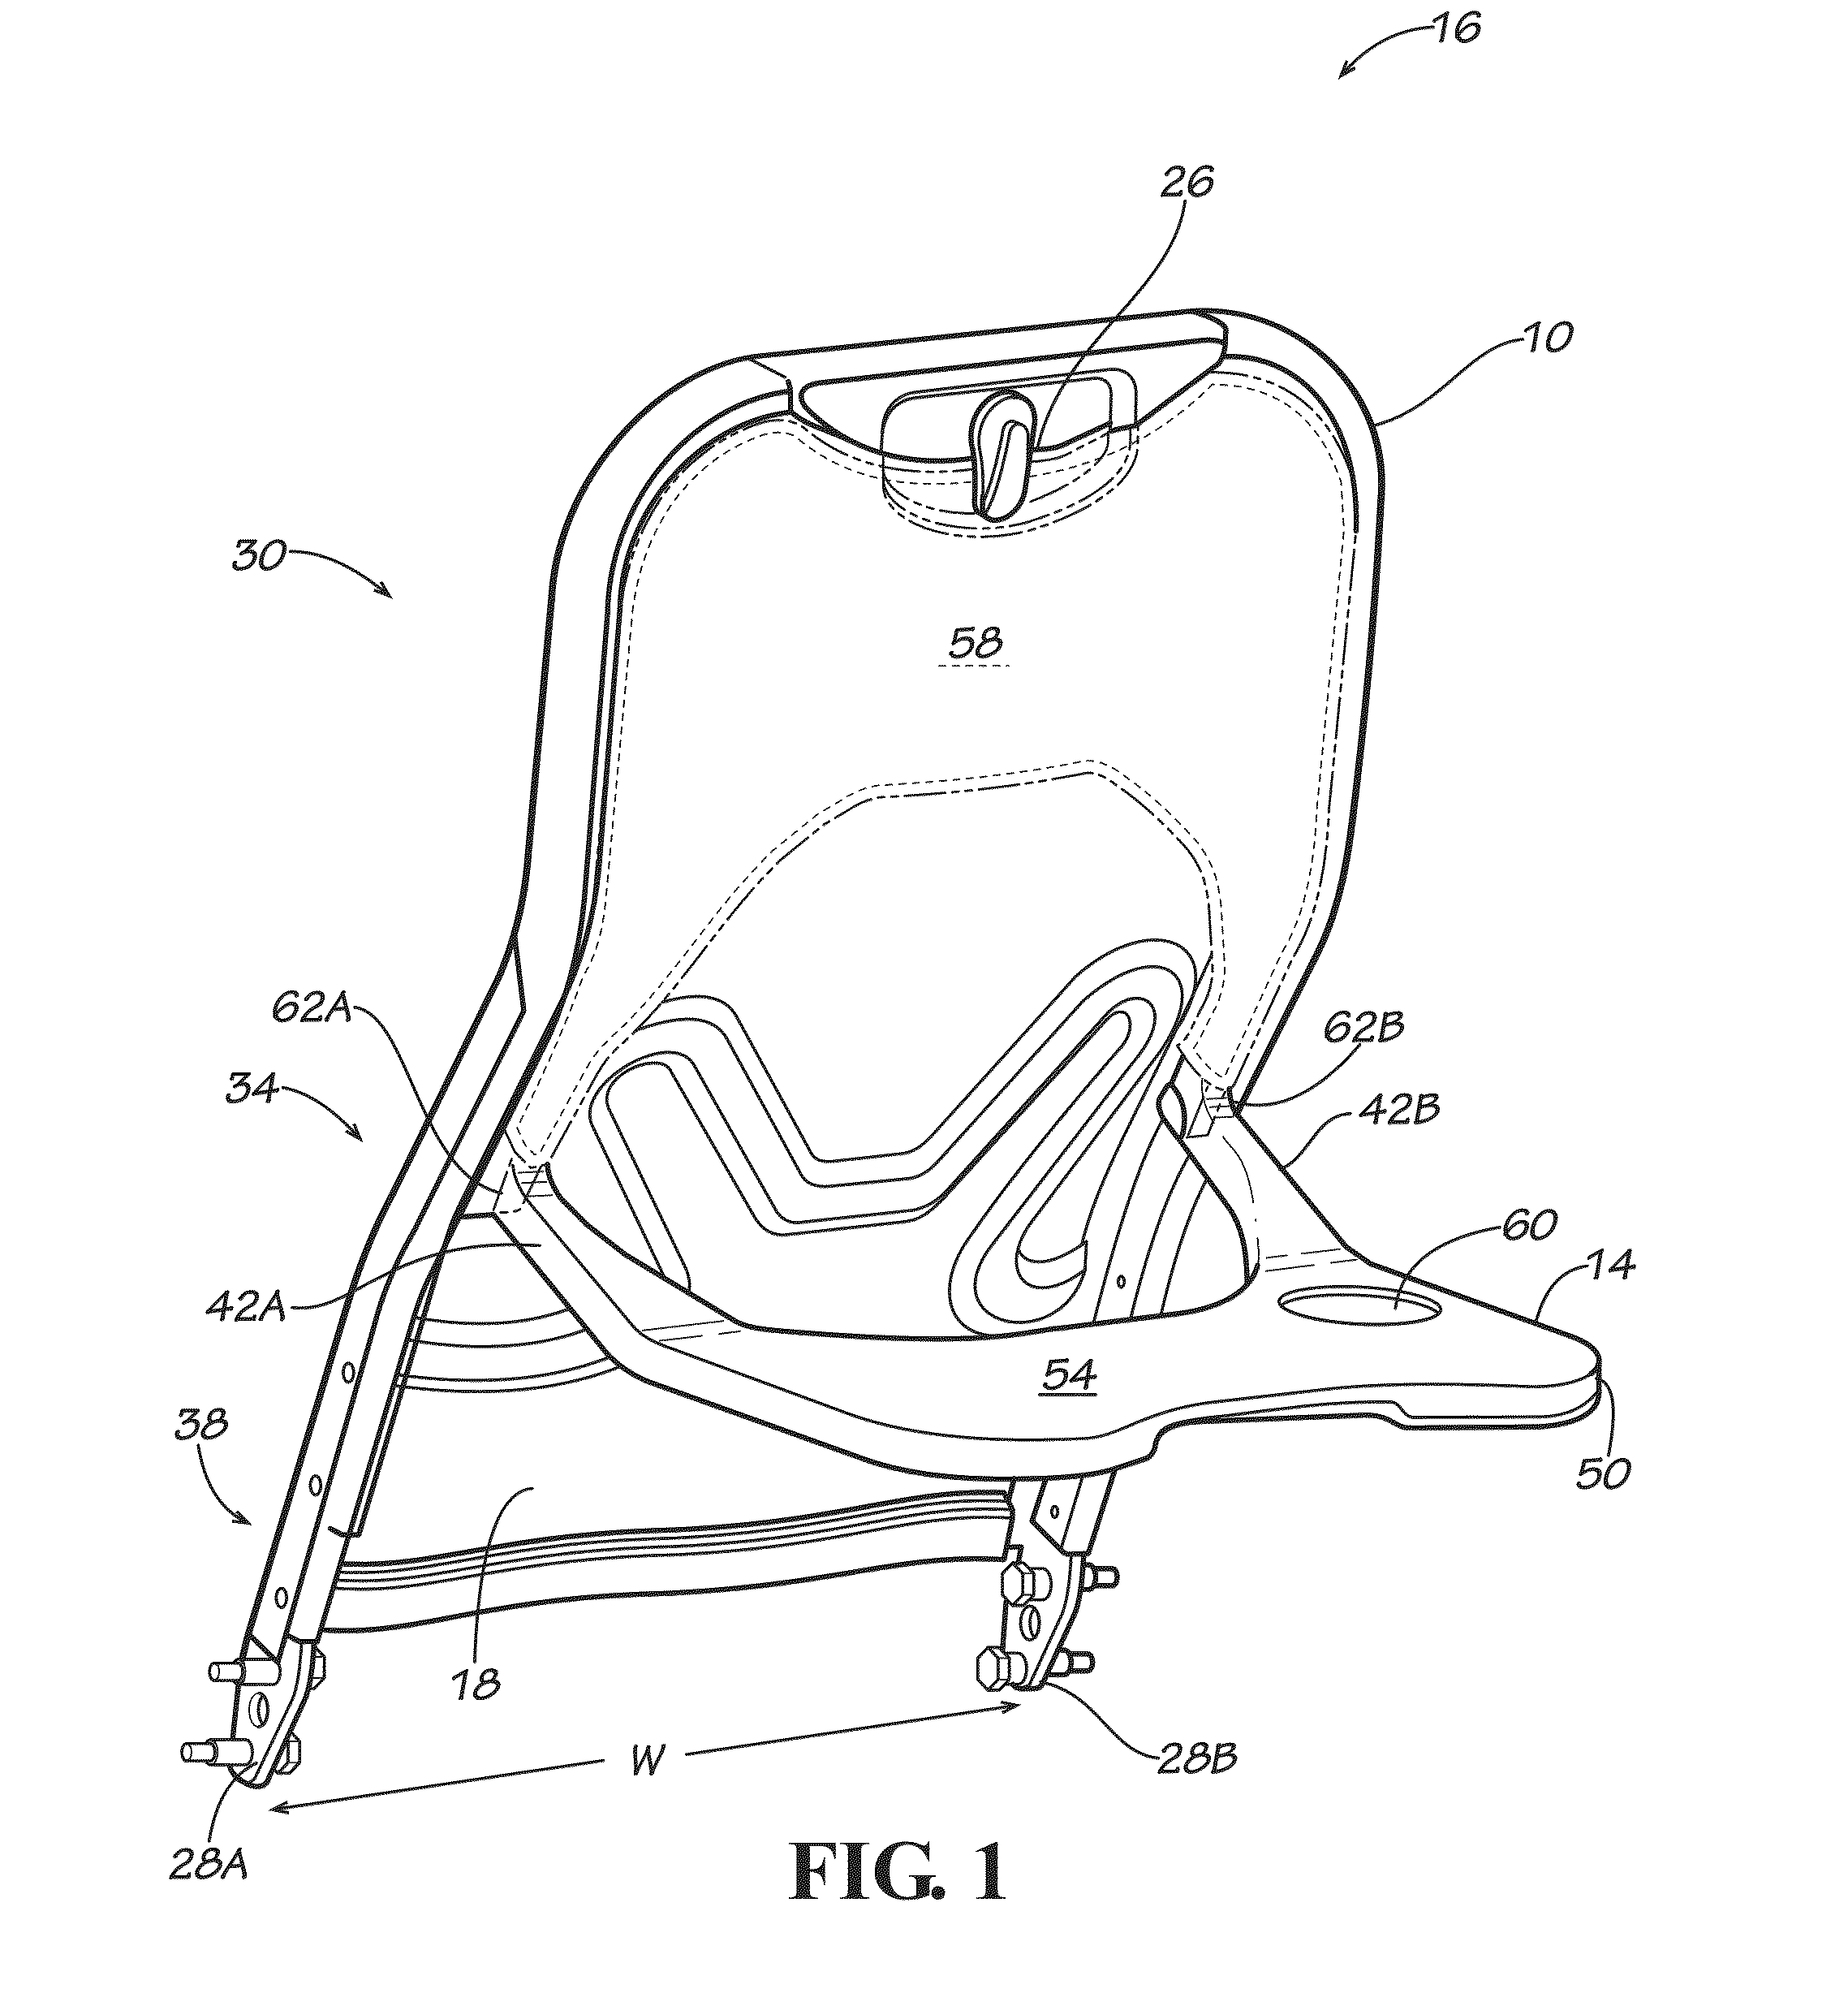 Passenger seating assemblies and aspects thereof